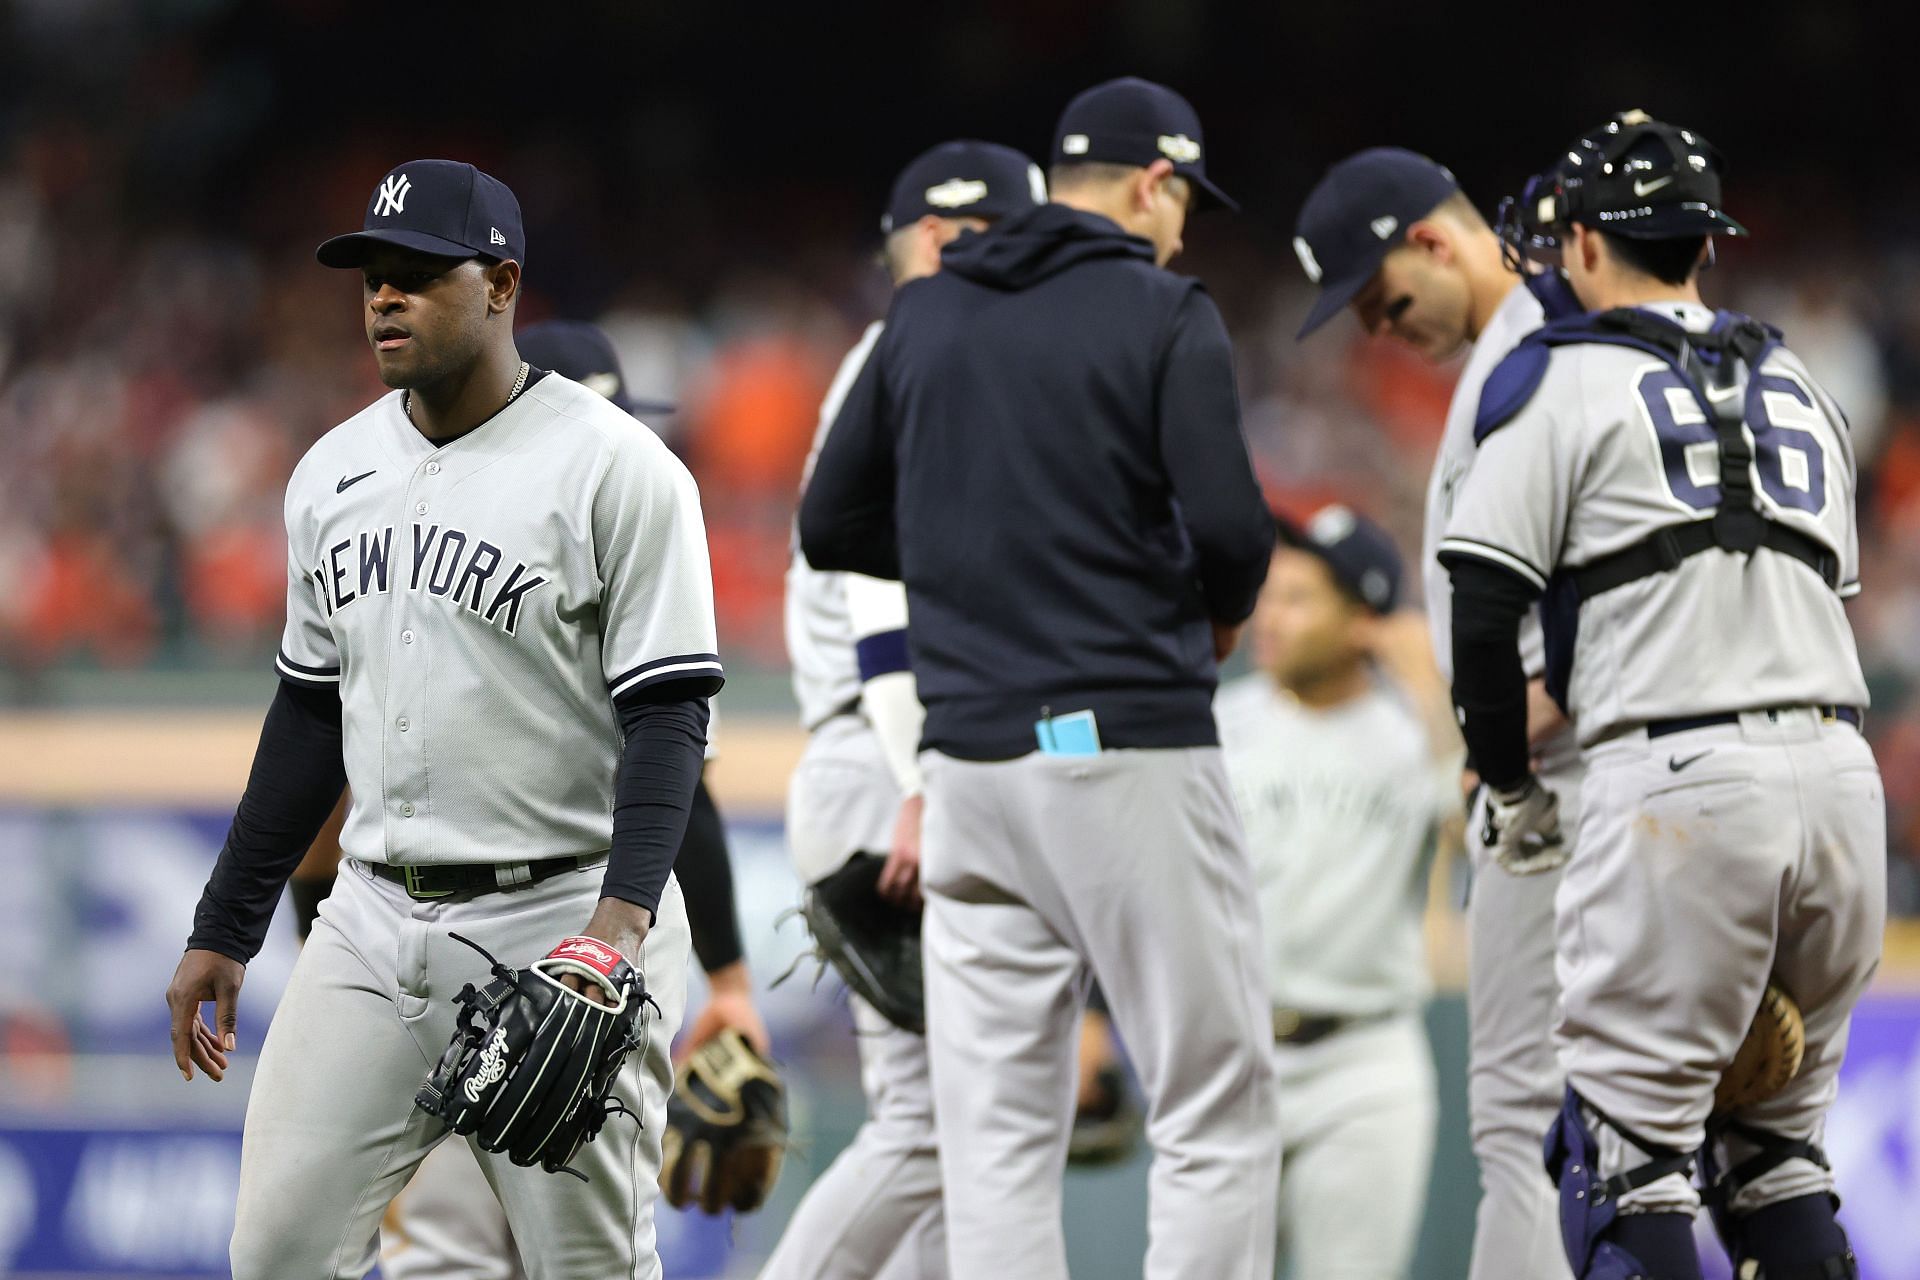 Luis Severino on the New York Yankees is removed in game two of the ALCS against the Houston Astros at Minute Maid Park